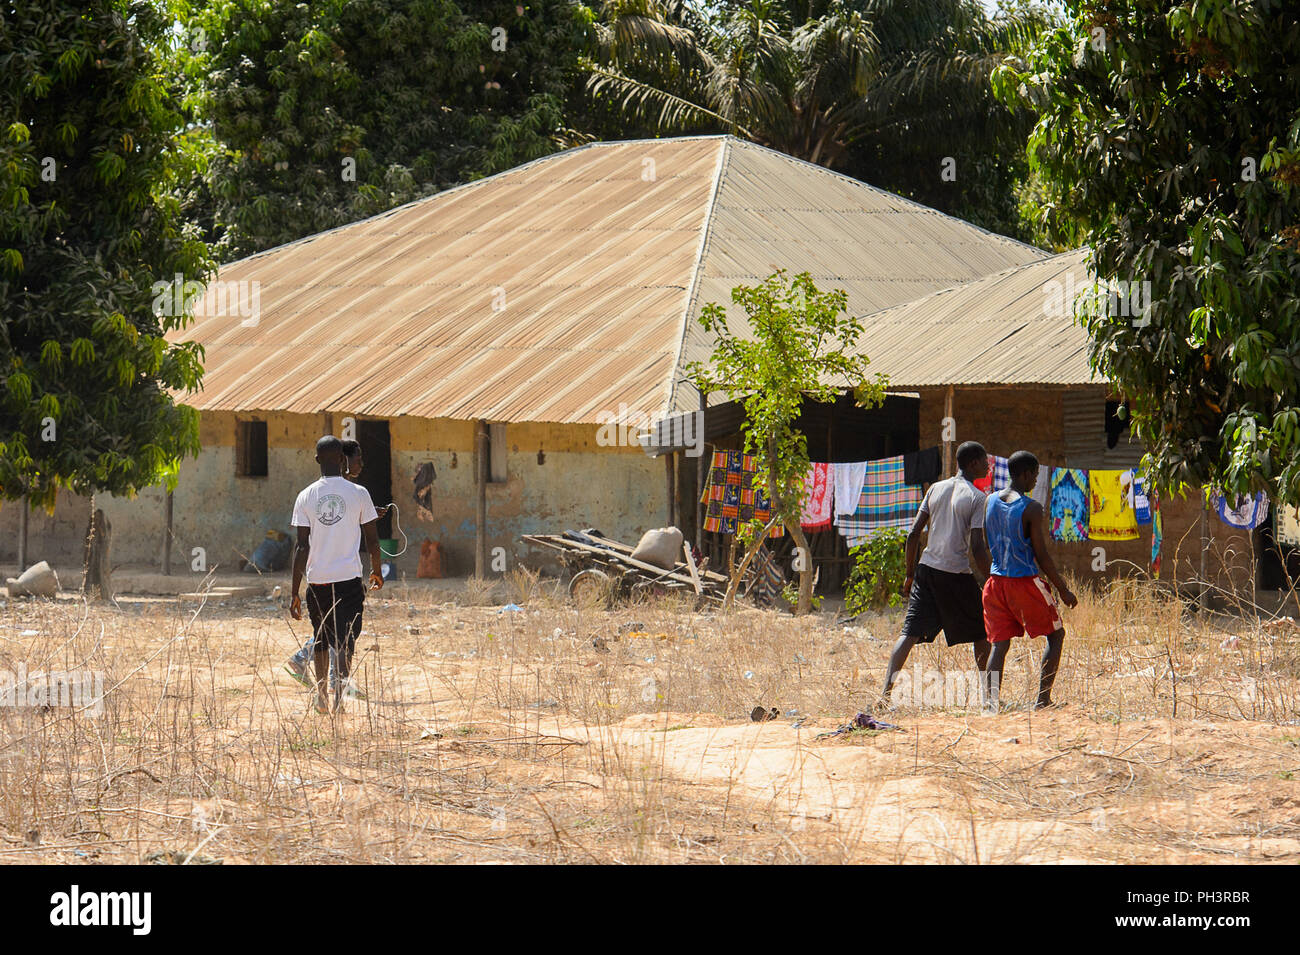 ROAD TO BISSAU, GUINEA B. - MAY 1, 2017: Unidentified local boys walk near the house in a village in Guinea Bissau. Still many people in the country l Stock Photo